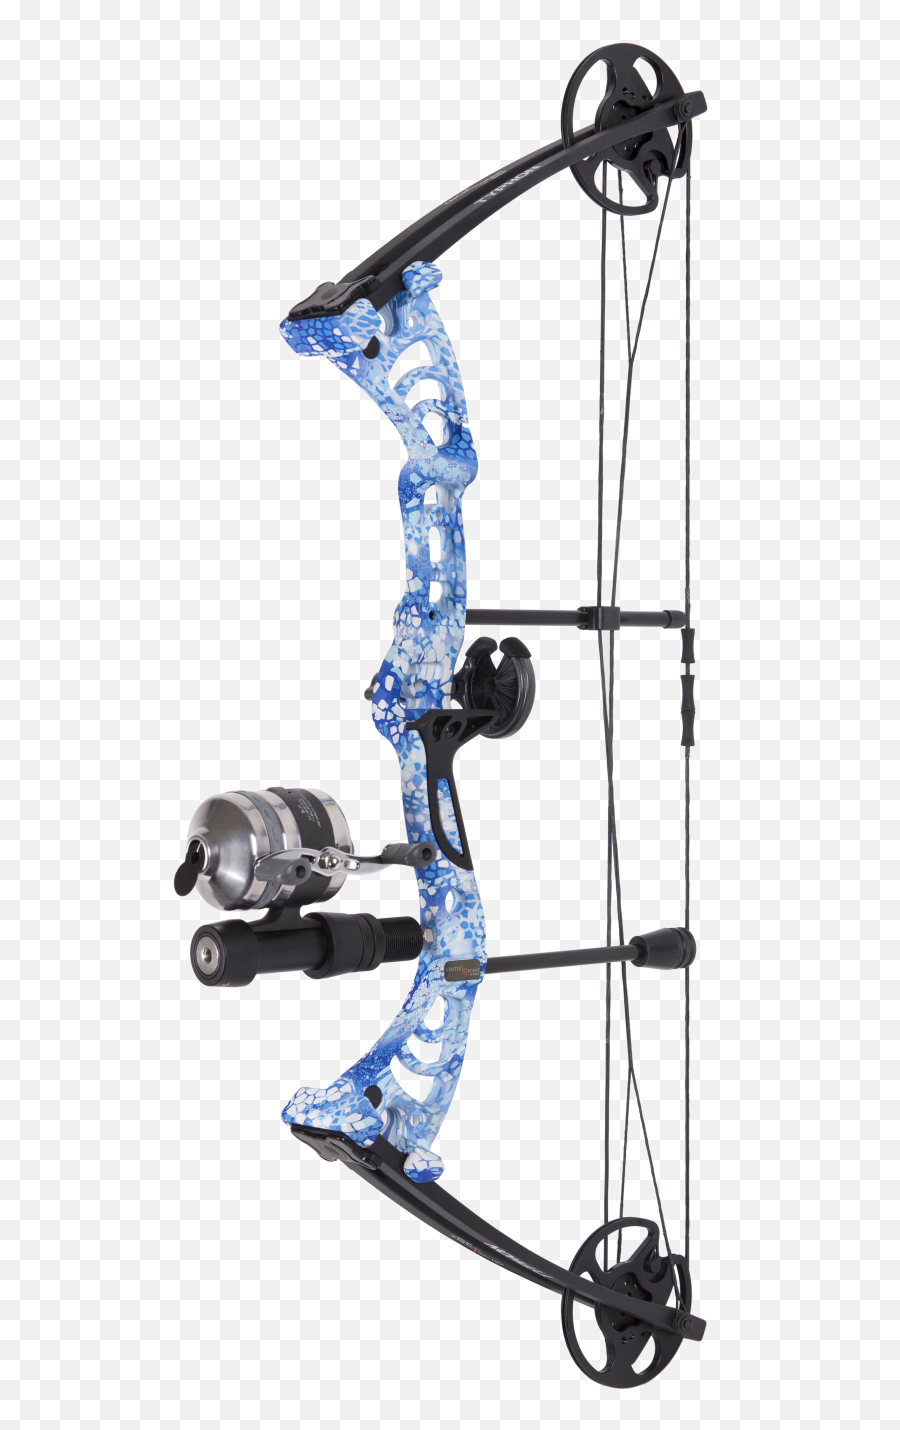 Typhon Bowfishing Package - Centerpoint Archery Crossbows Emoji,Archery Emoticon Browser